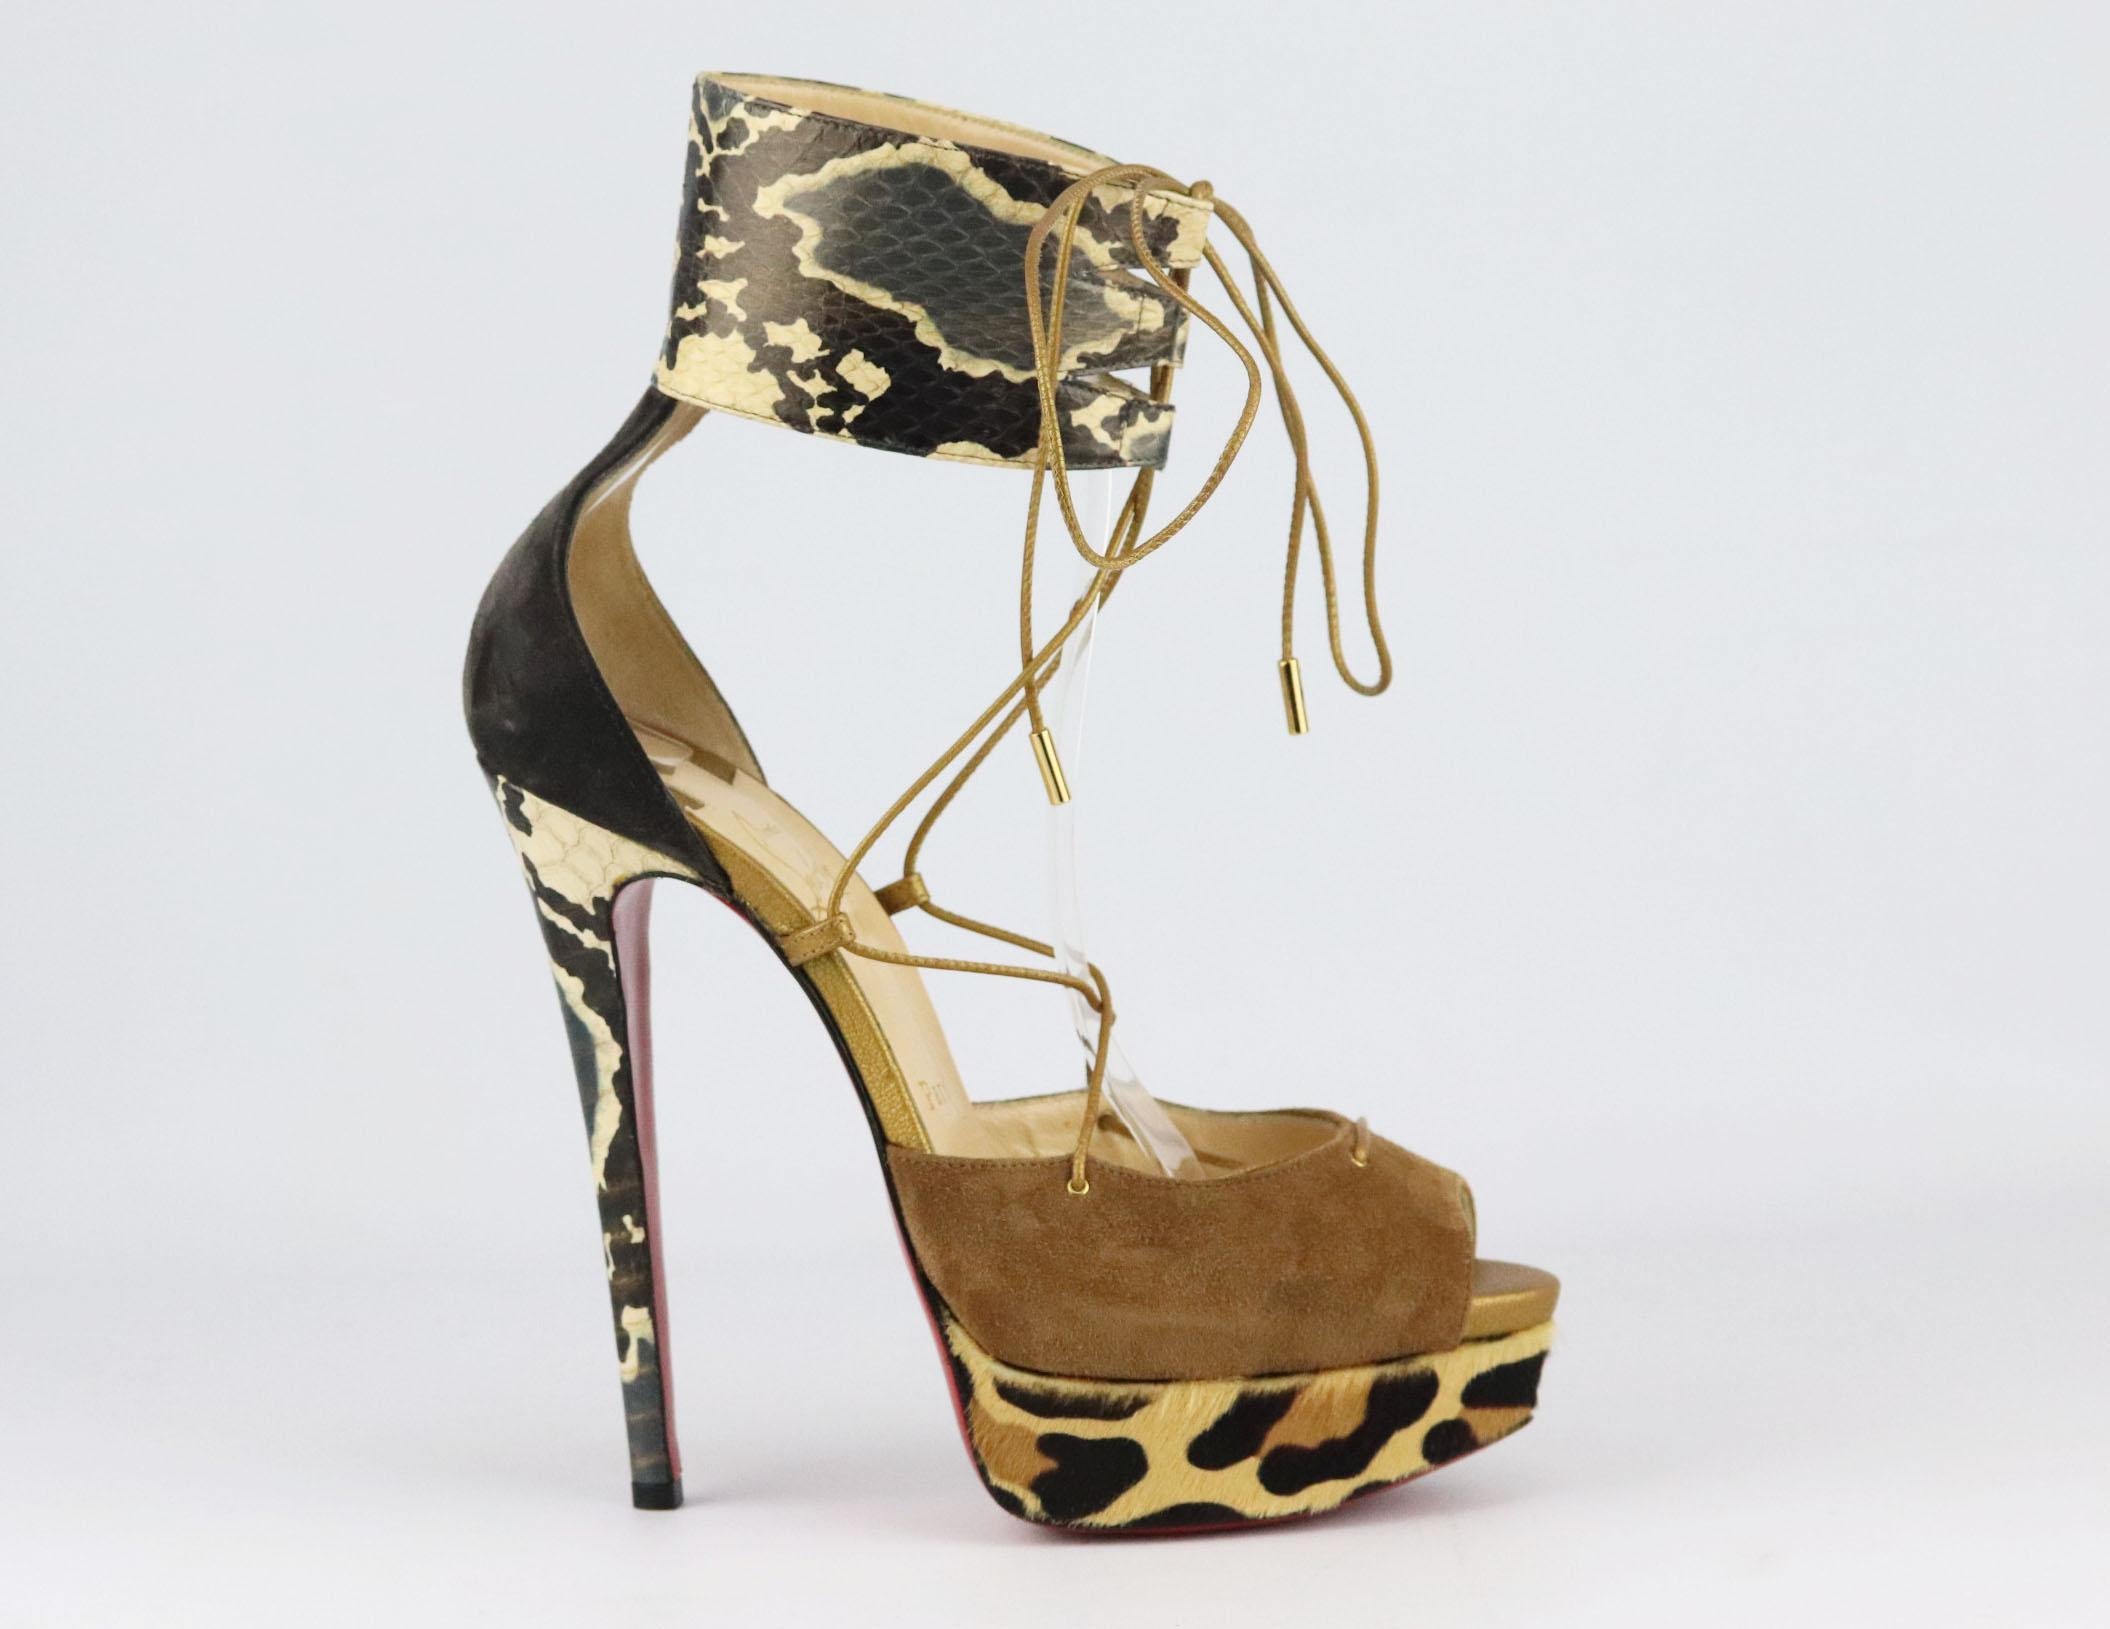 Christian Louboutin often looks to statement silhouettes for inspiration, and these sandals have a distinct feel to them, made from snake-effect leather, suede and leopard-print calf-hair, they have a stiletto heel and platform that makes them